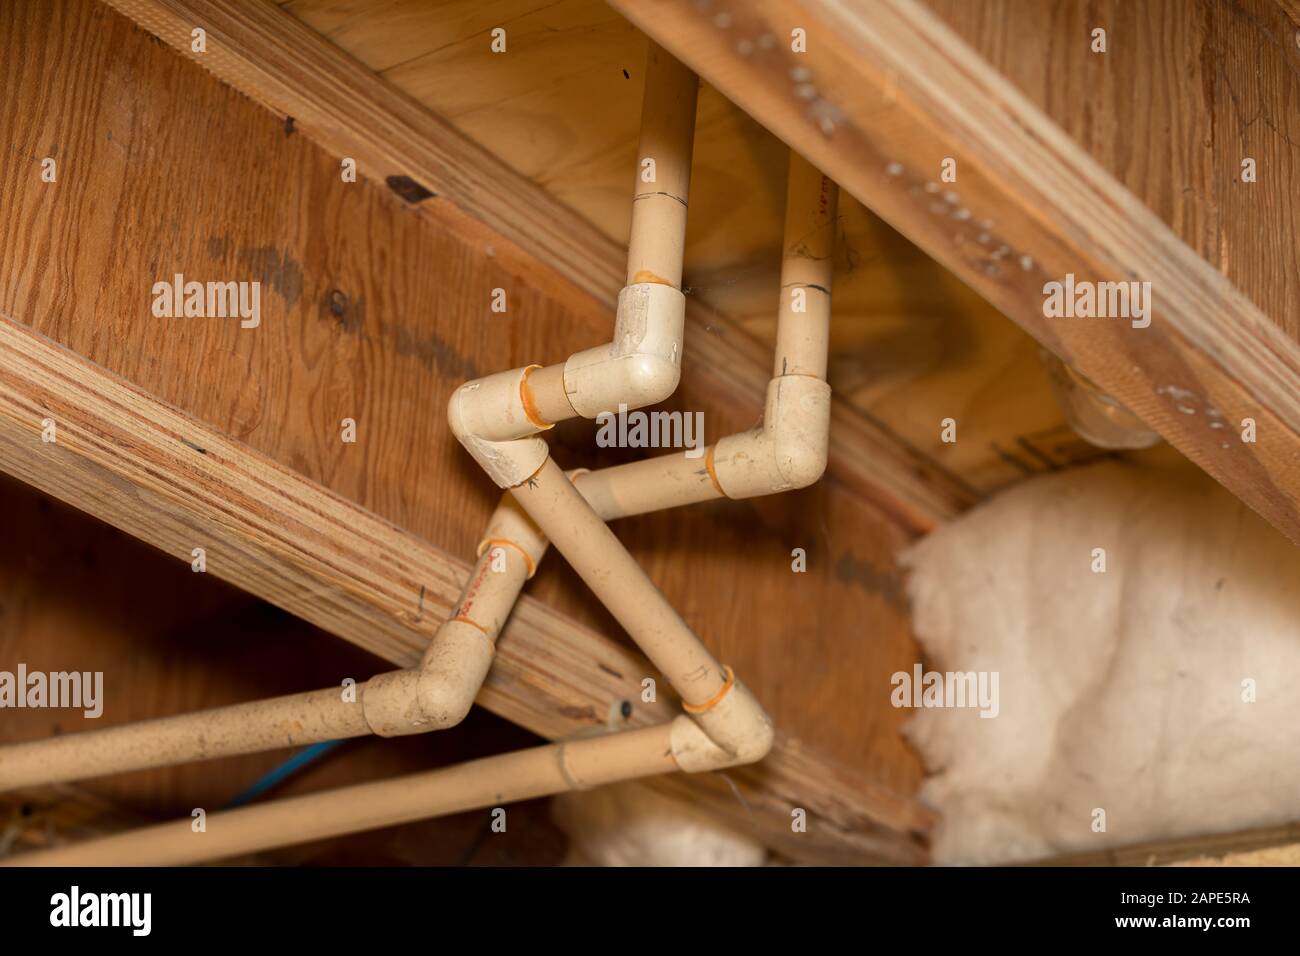 Old Pvc Plastic Water Supply Pipes Installed Under House In Crawlspace Hot And Cold Water Plumbing System For Bathroom Sink And Shower Stock Photo Alamy